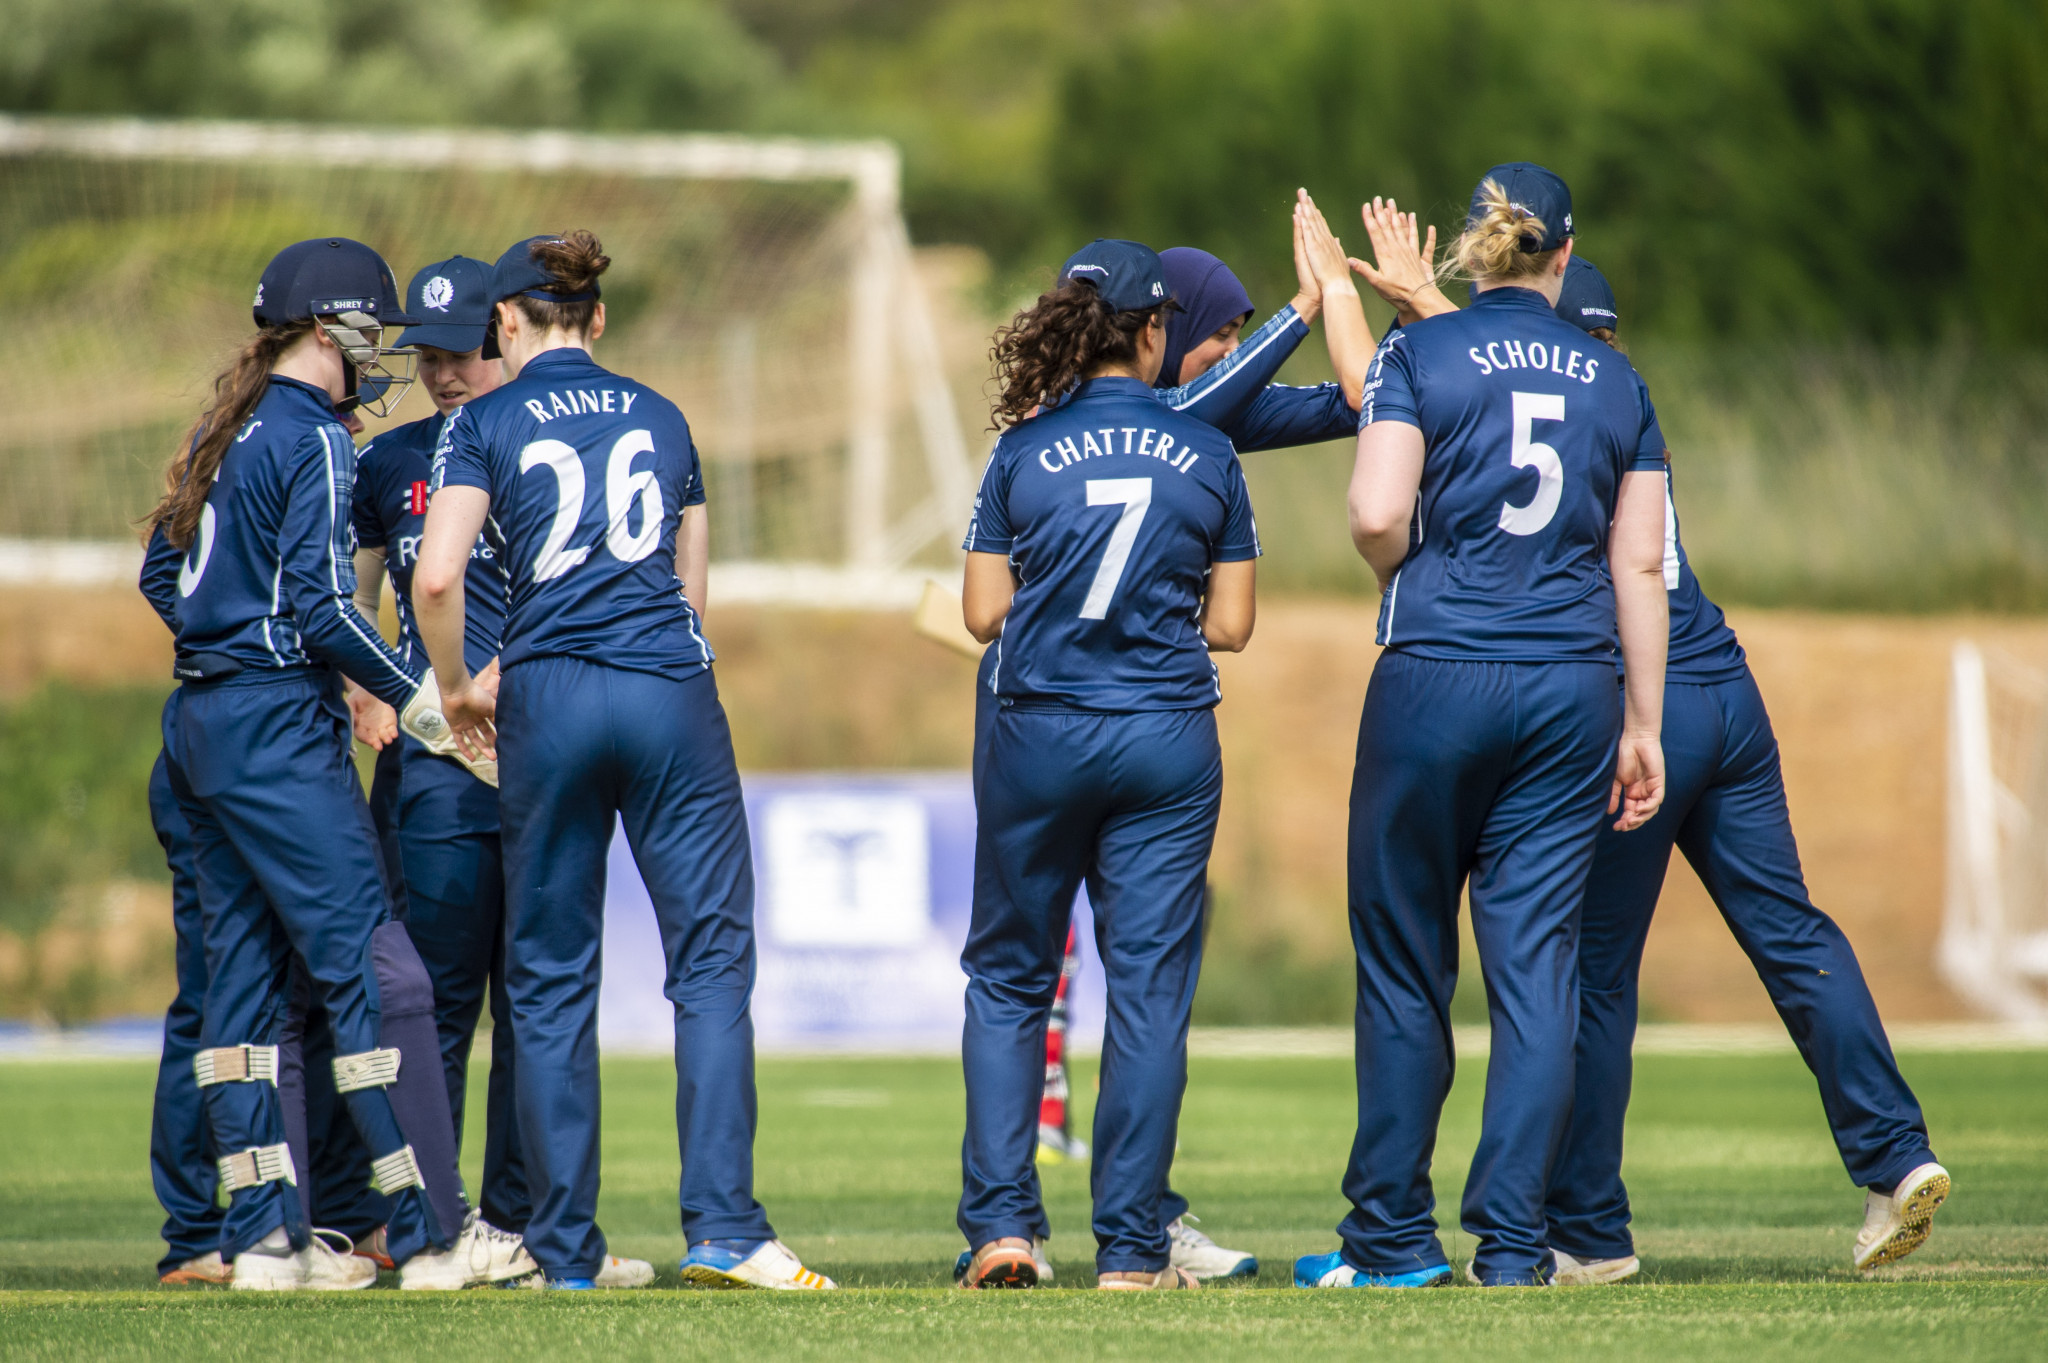 ICC announces qualification process for Women's T20 World Cup in 2023